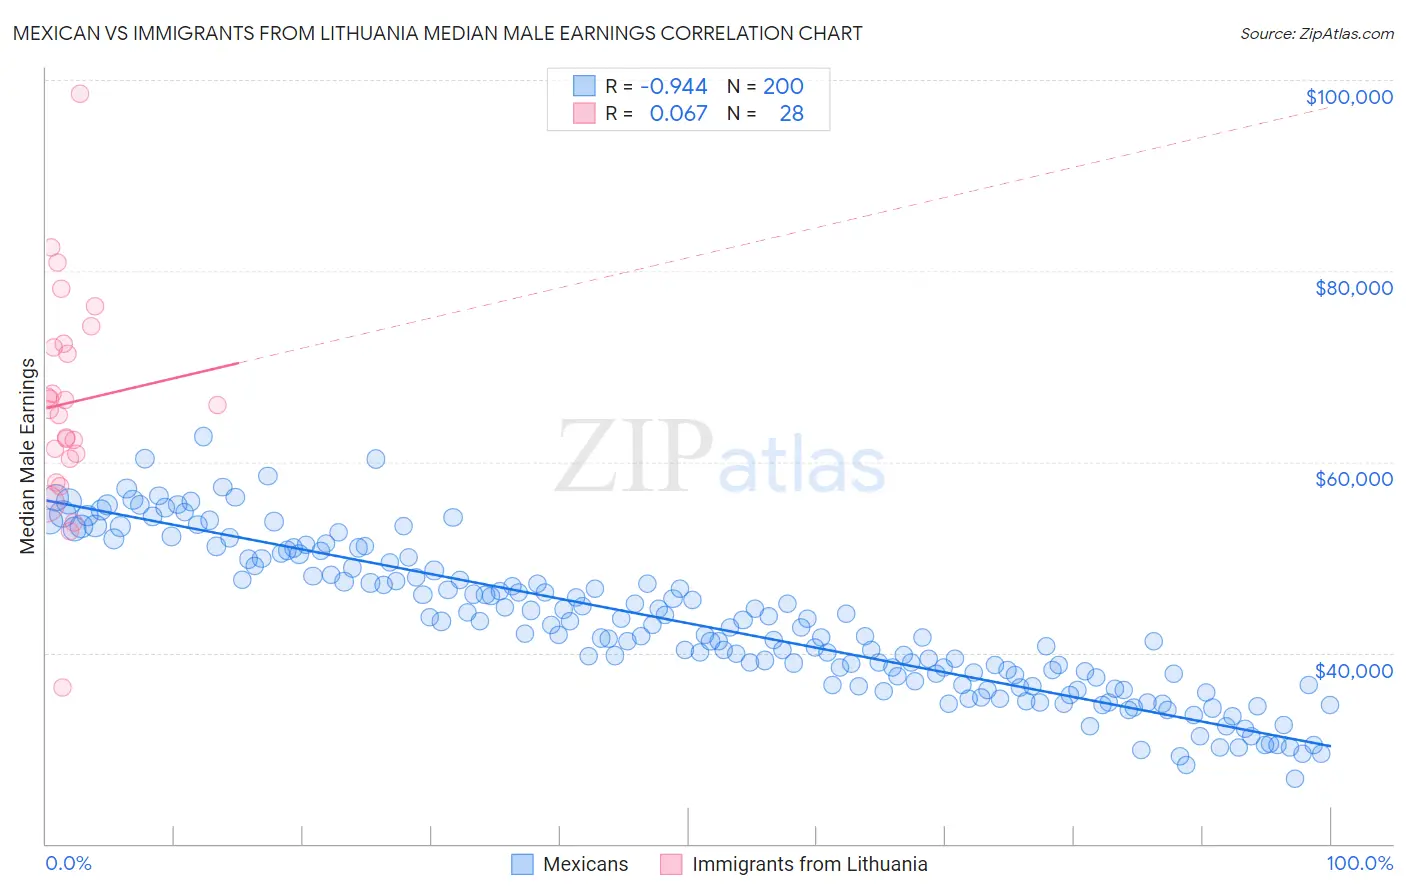 Mexican vs Immigrants from Lithuania Median Male Earnings